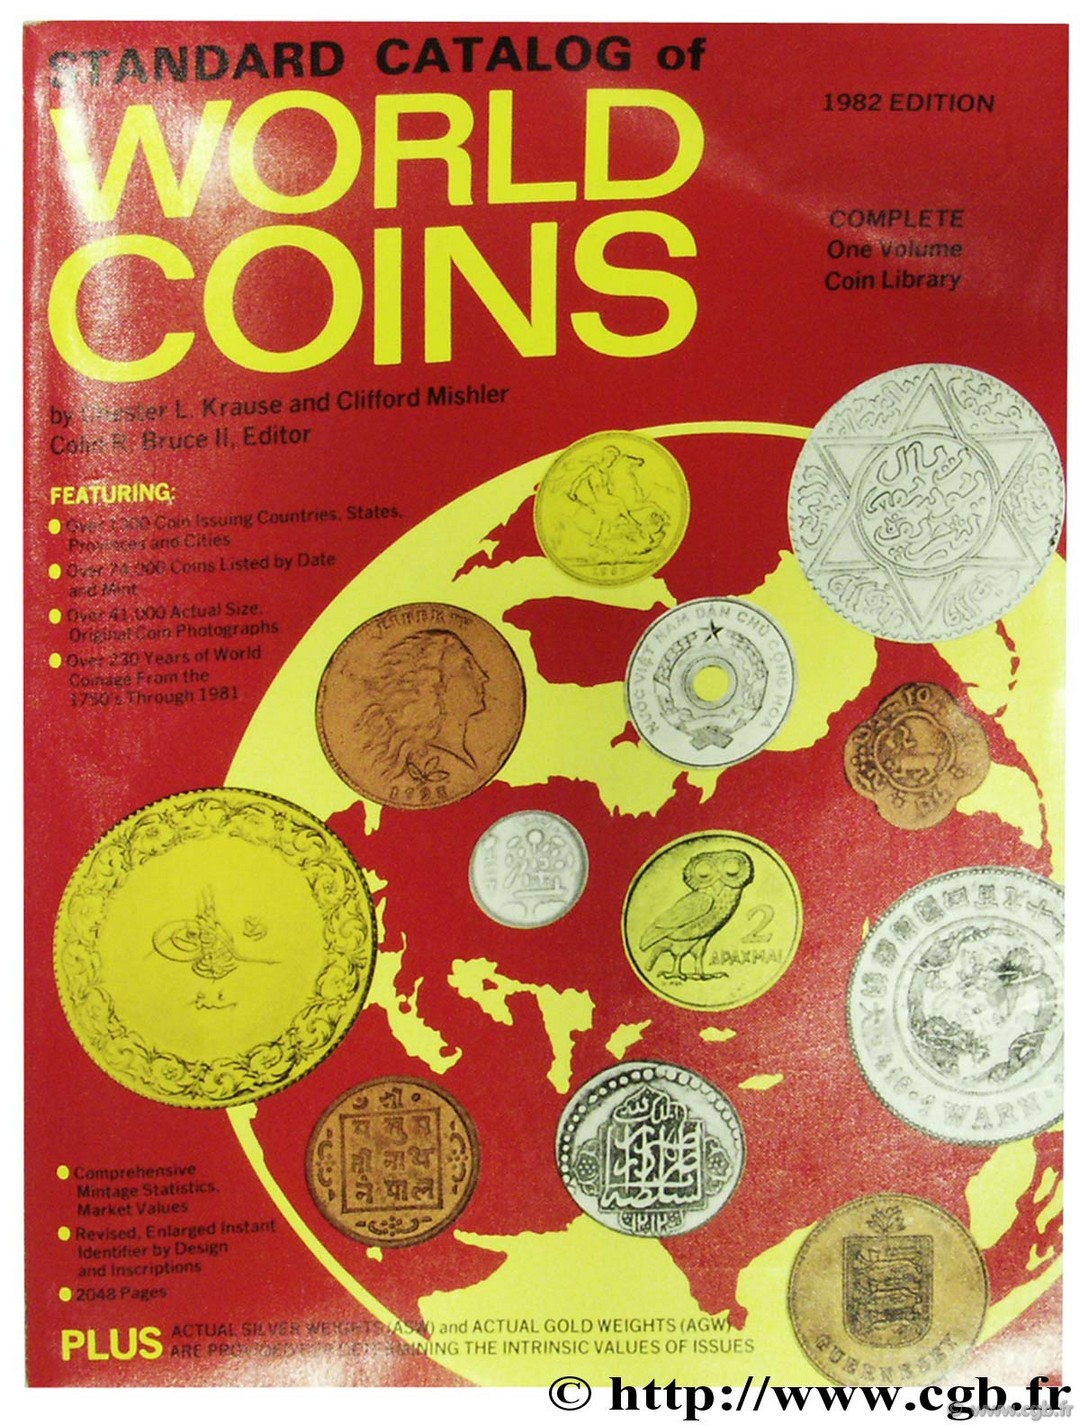 Standard Catalogue of World Coins - 1982 edition KRAUSE C.-L, MISHLER C.